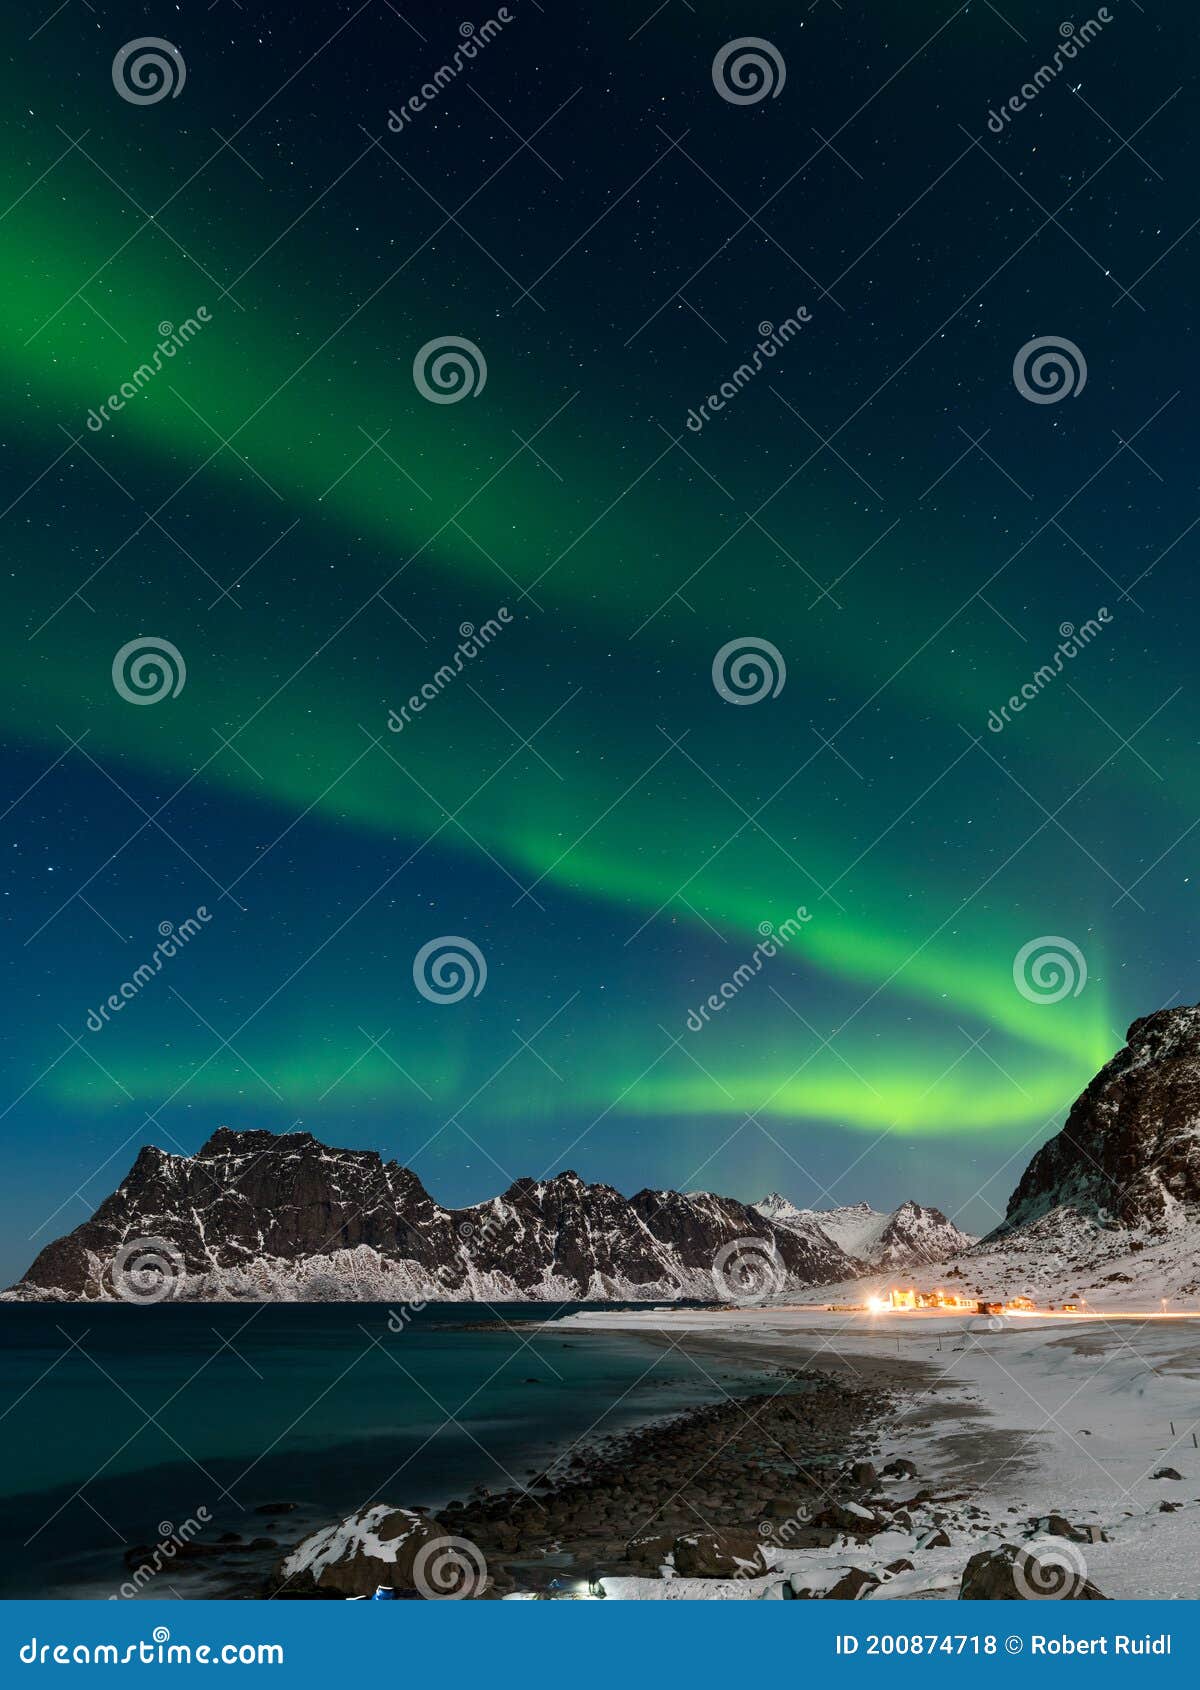 Spectacular Dancing Green Strong Northern Lights Over The Famous Round